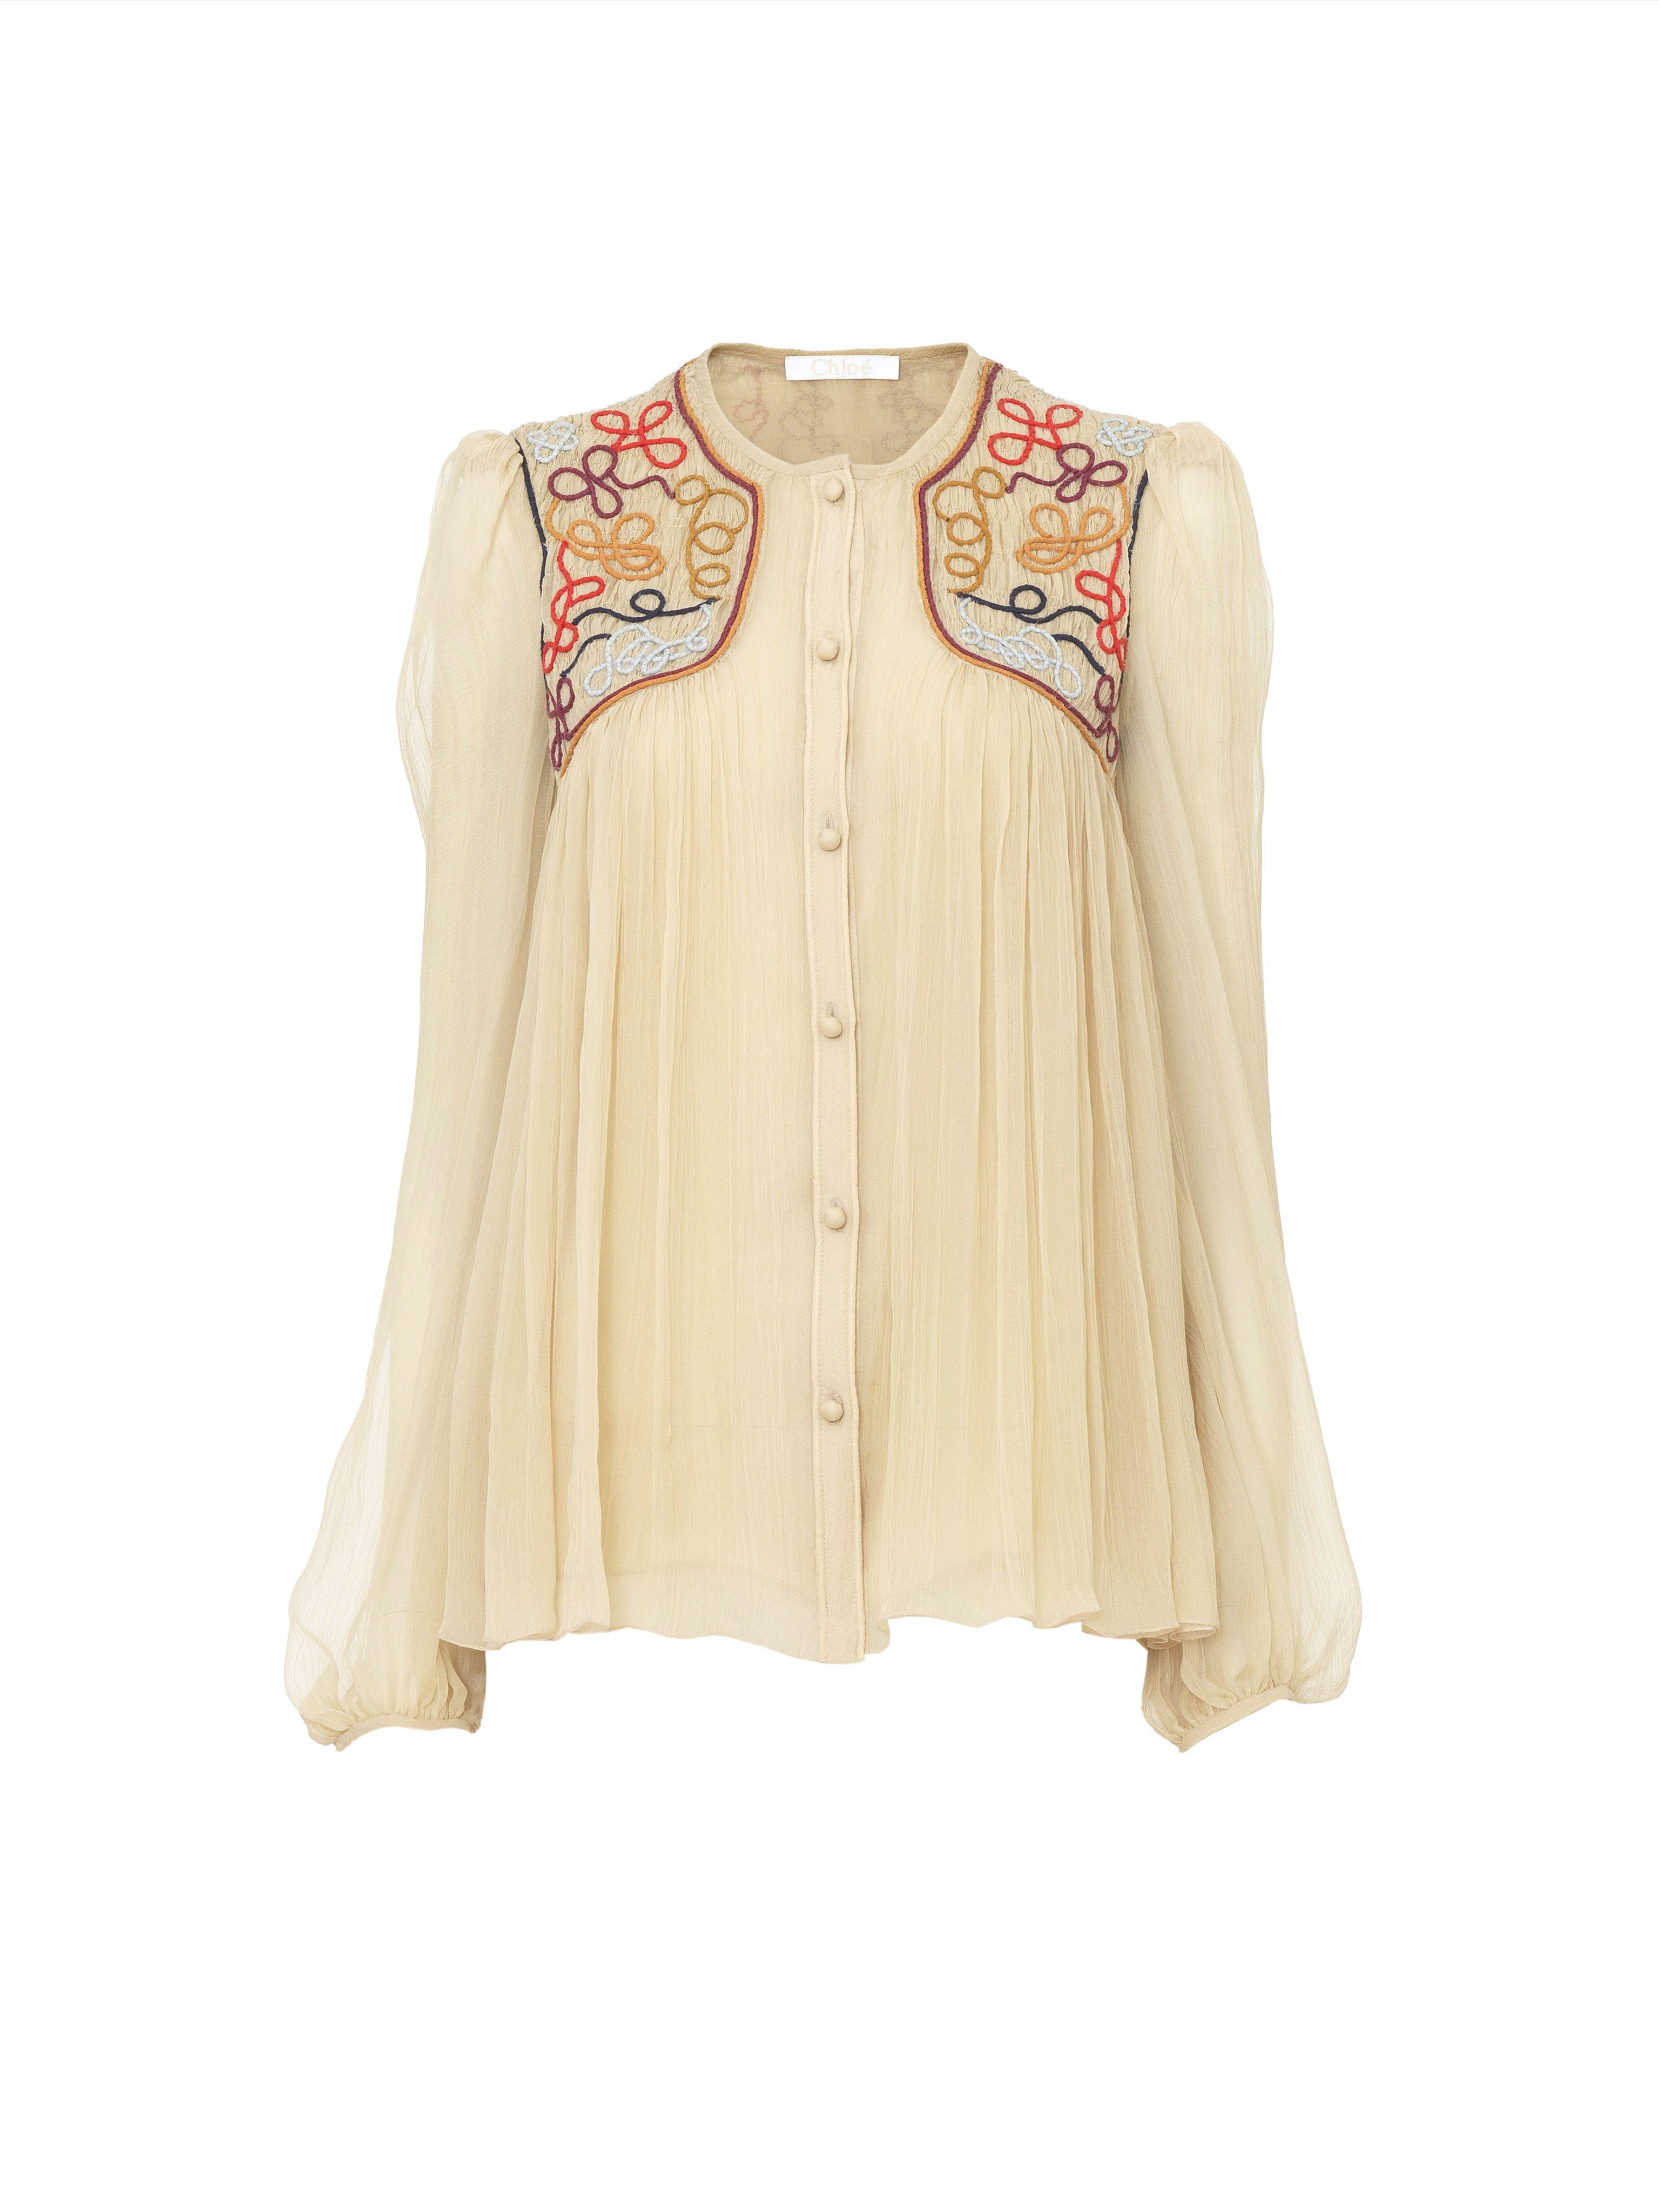 Chloé Silk Embroidered Shirt in Brown | Lyst